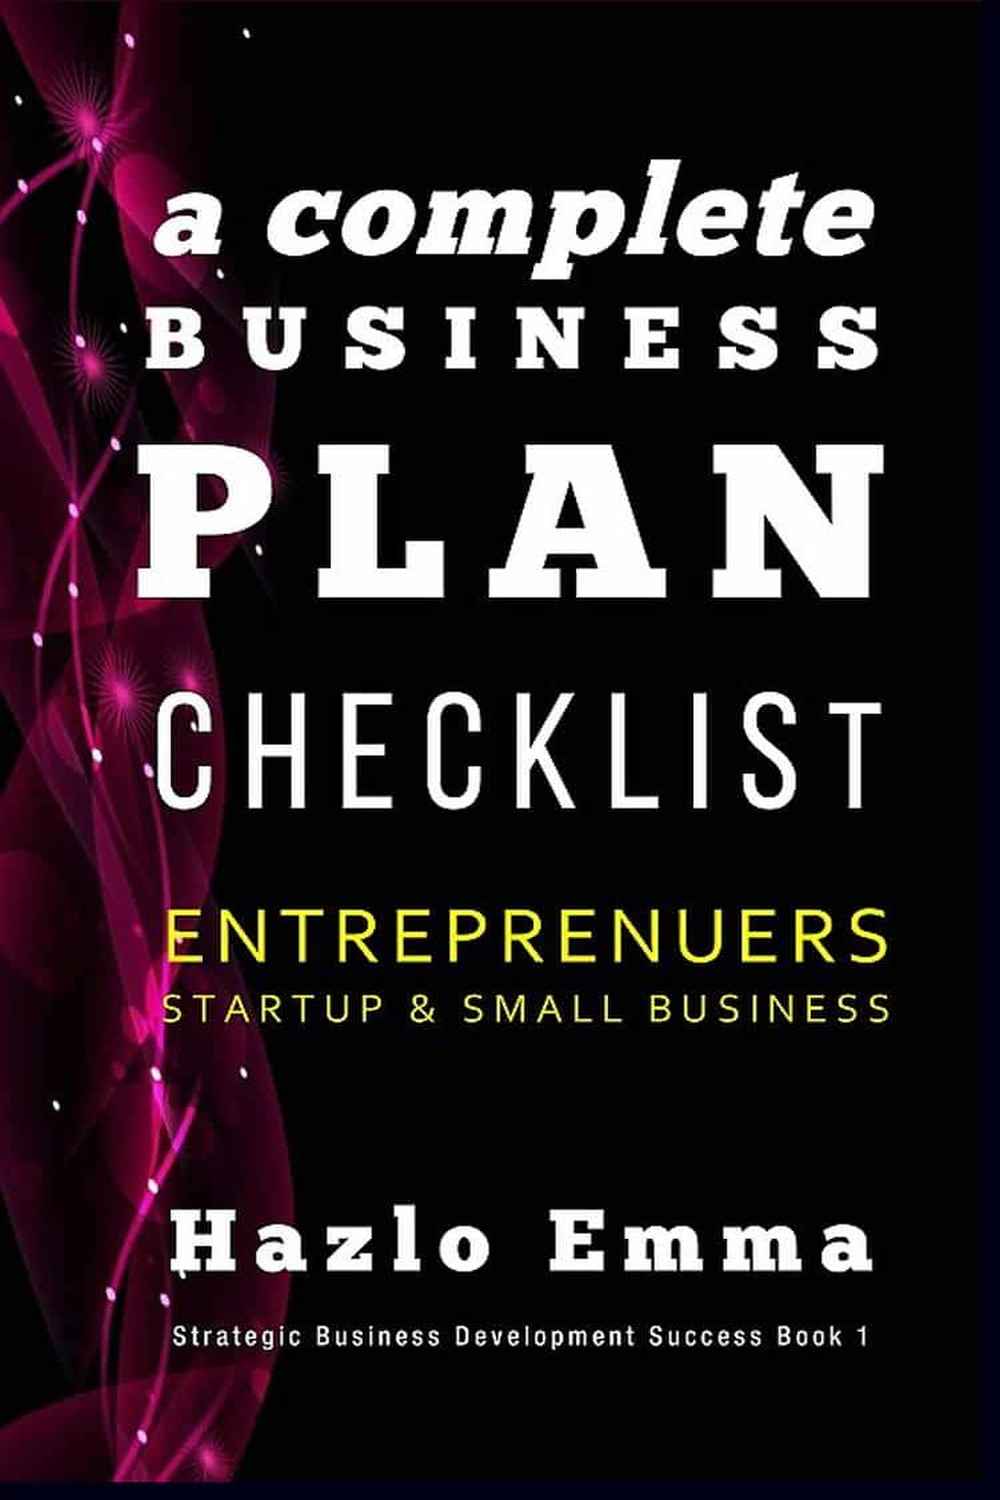 Bullet-proof business plan template checklist for successful entrepreneurs, startup founders and small business owners